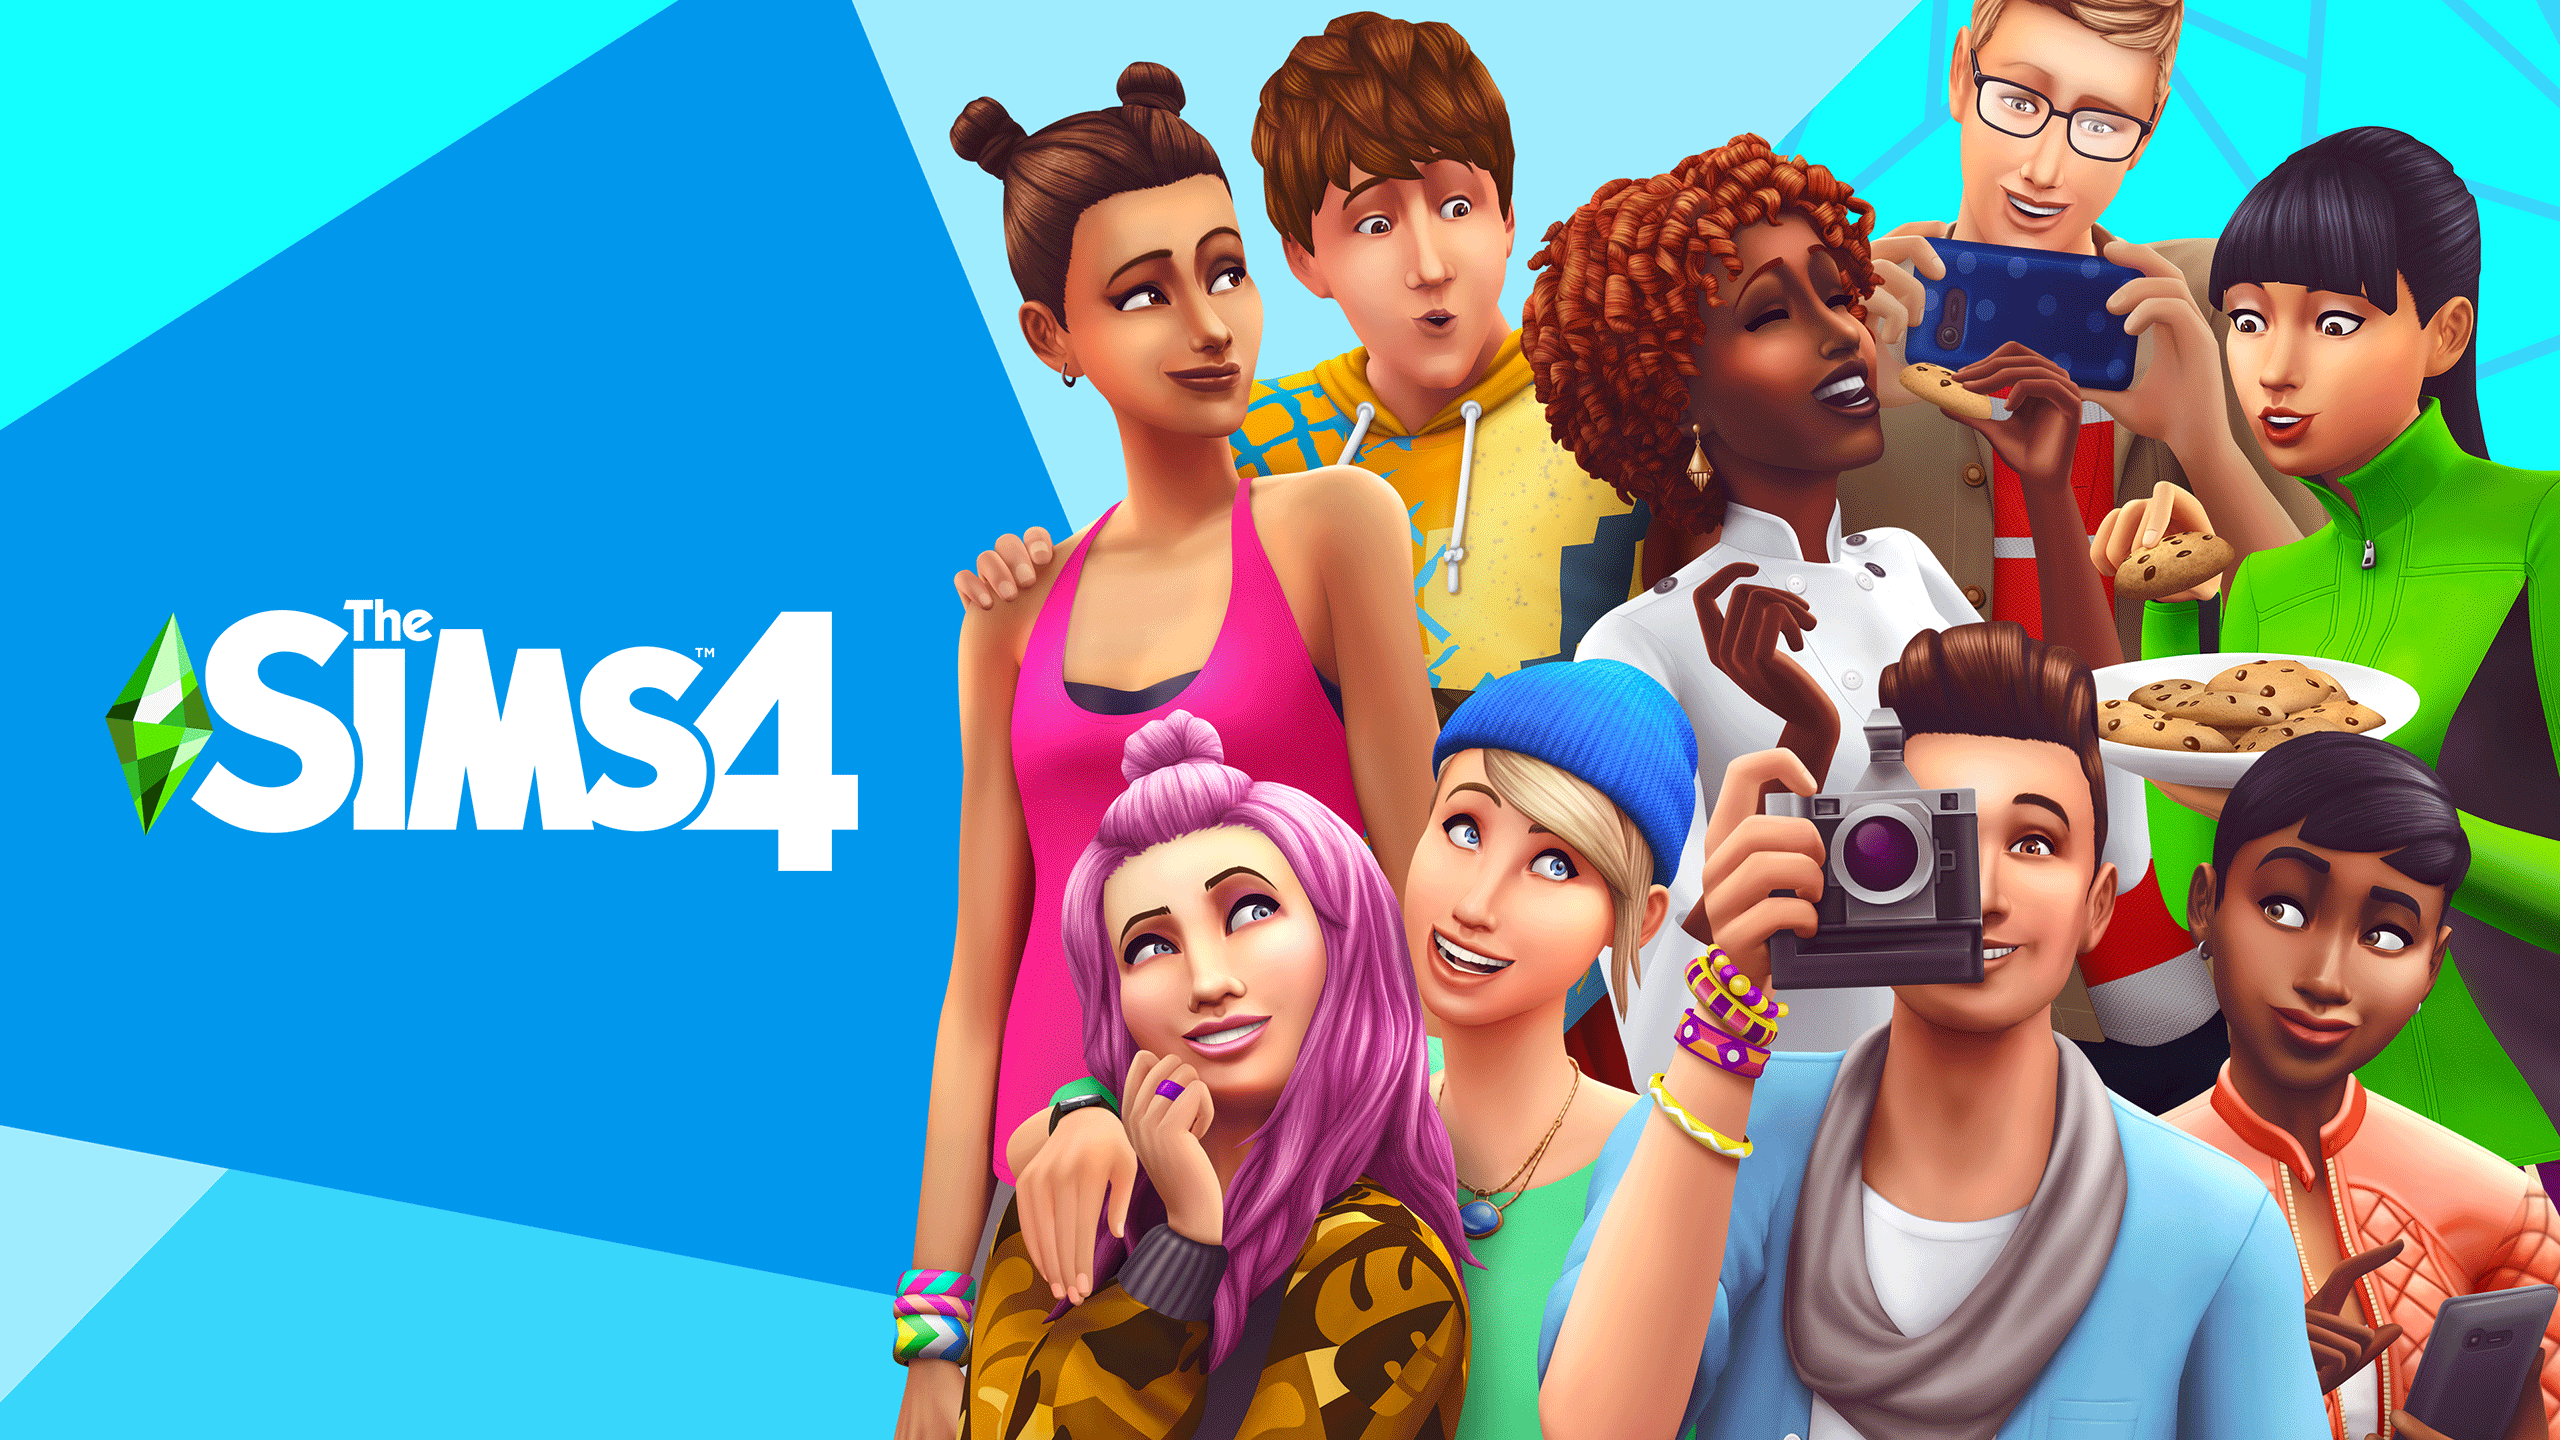 The sims 4 steam price фото 2